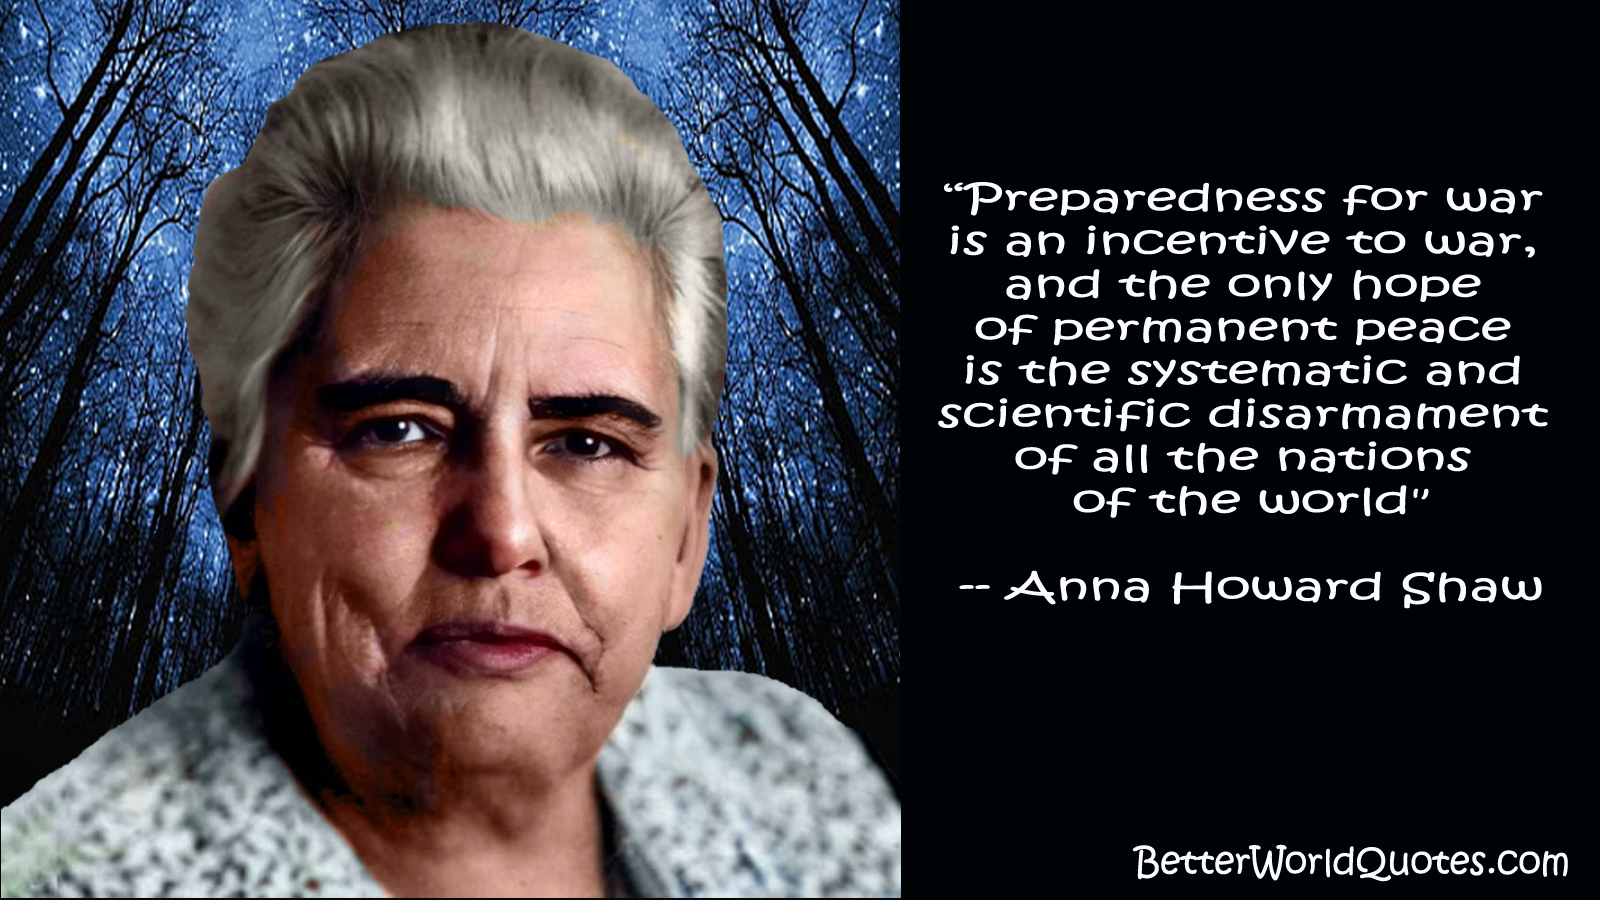 Anna Howard Shaw - preparedness for war is an incentive to war, and the only hope of permanent peace is the systematic and scientific disarmament of all the nations of the world